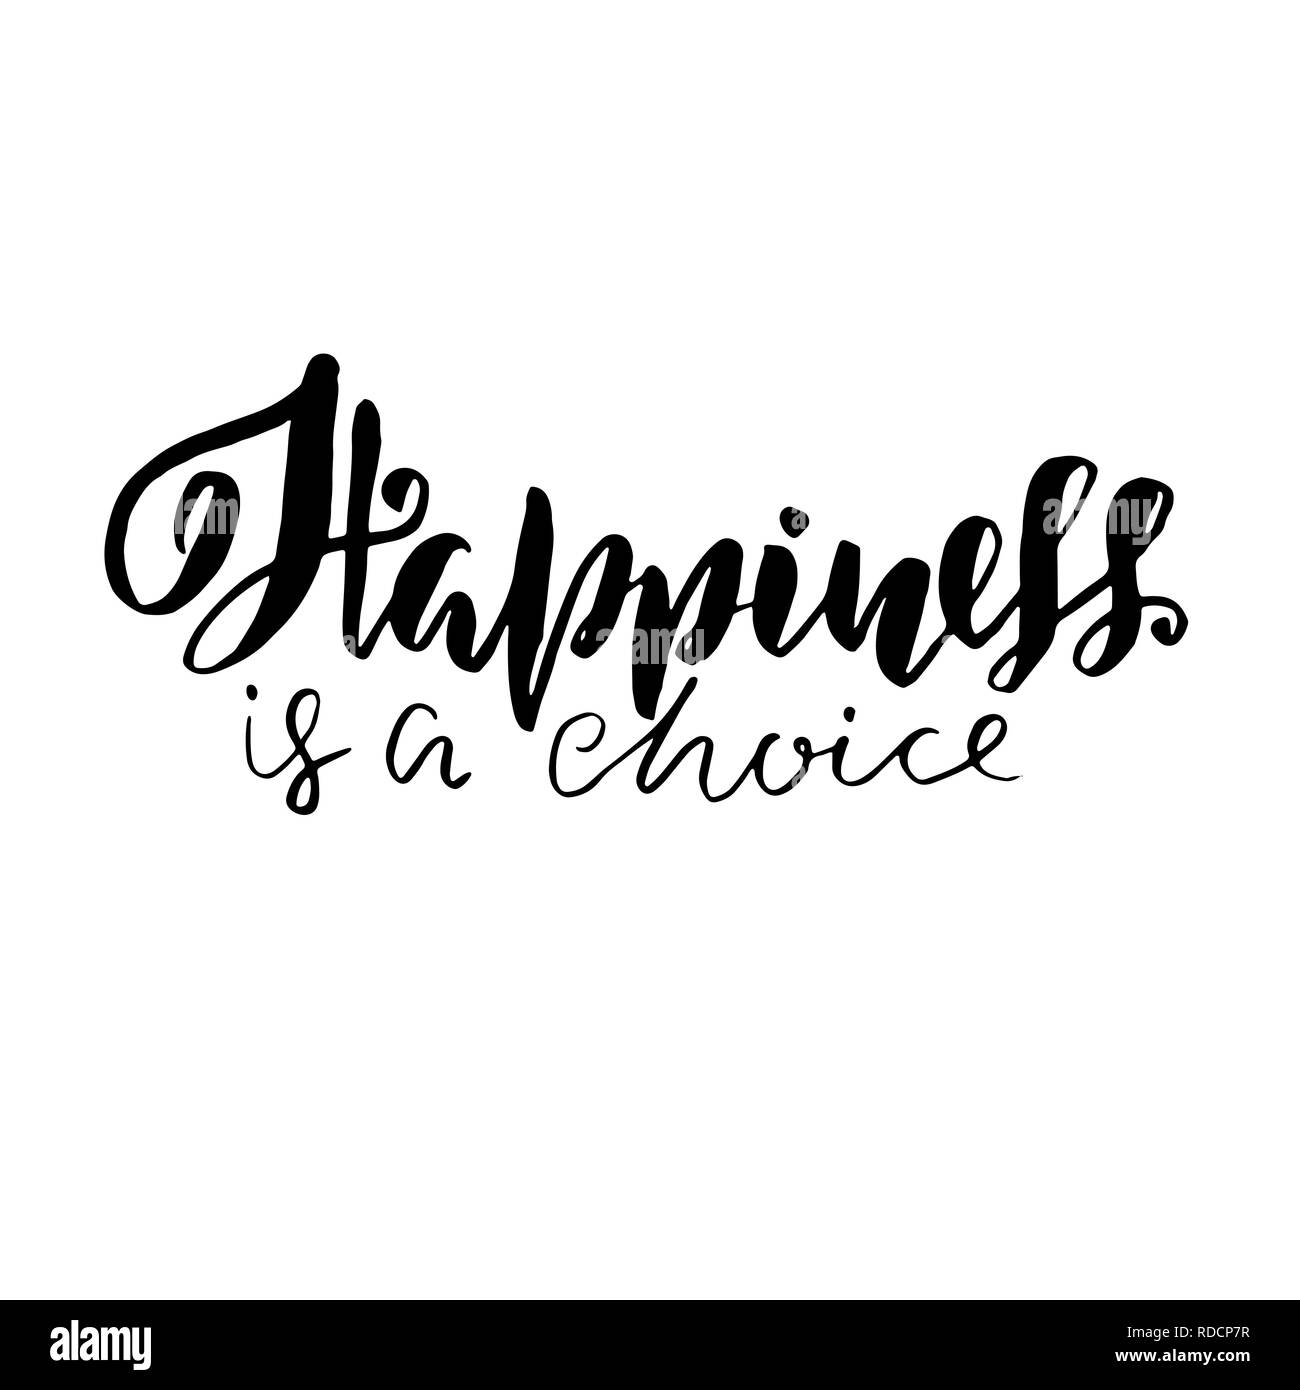 Happiness is a choice. Hand drawn brush lettering. Modern calligraphy. Ink vector illustration. Stock Vector